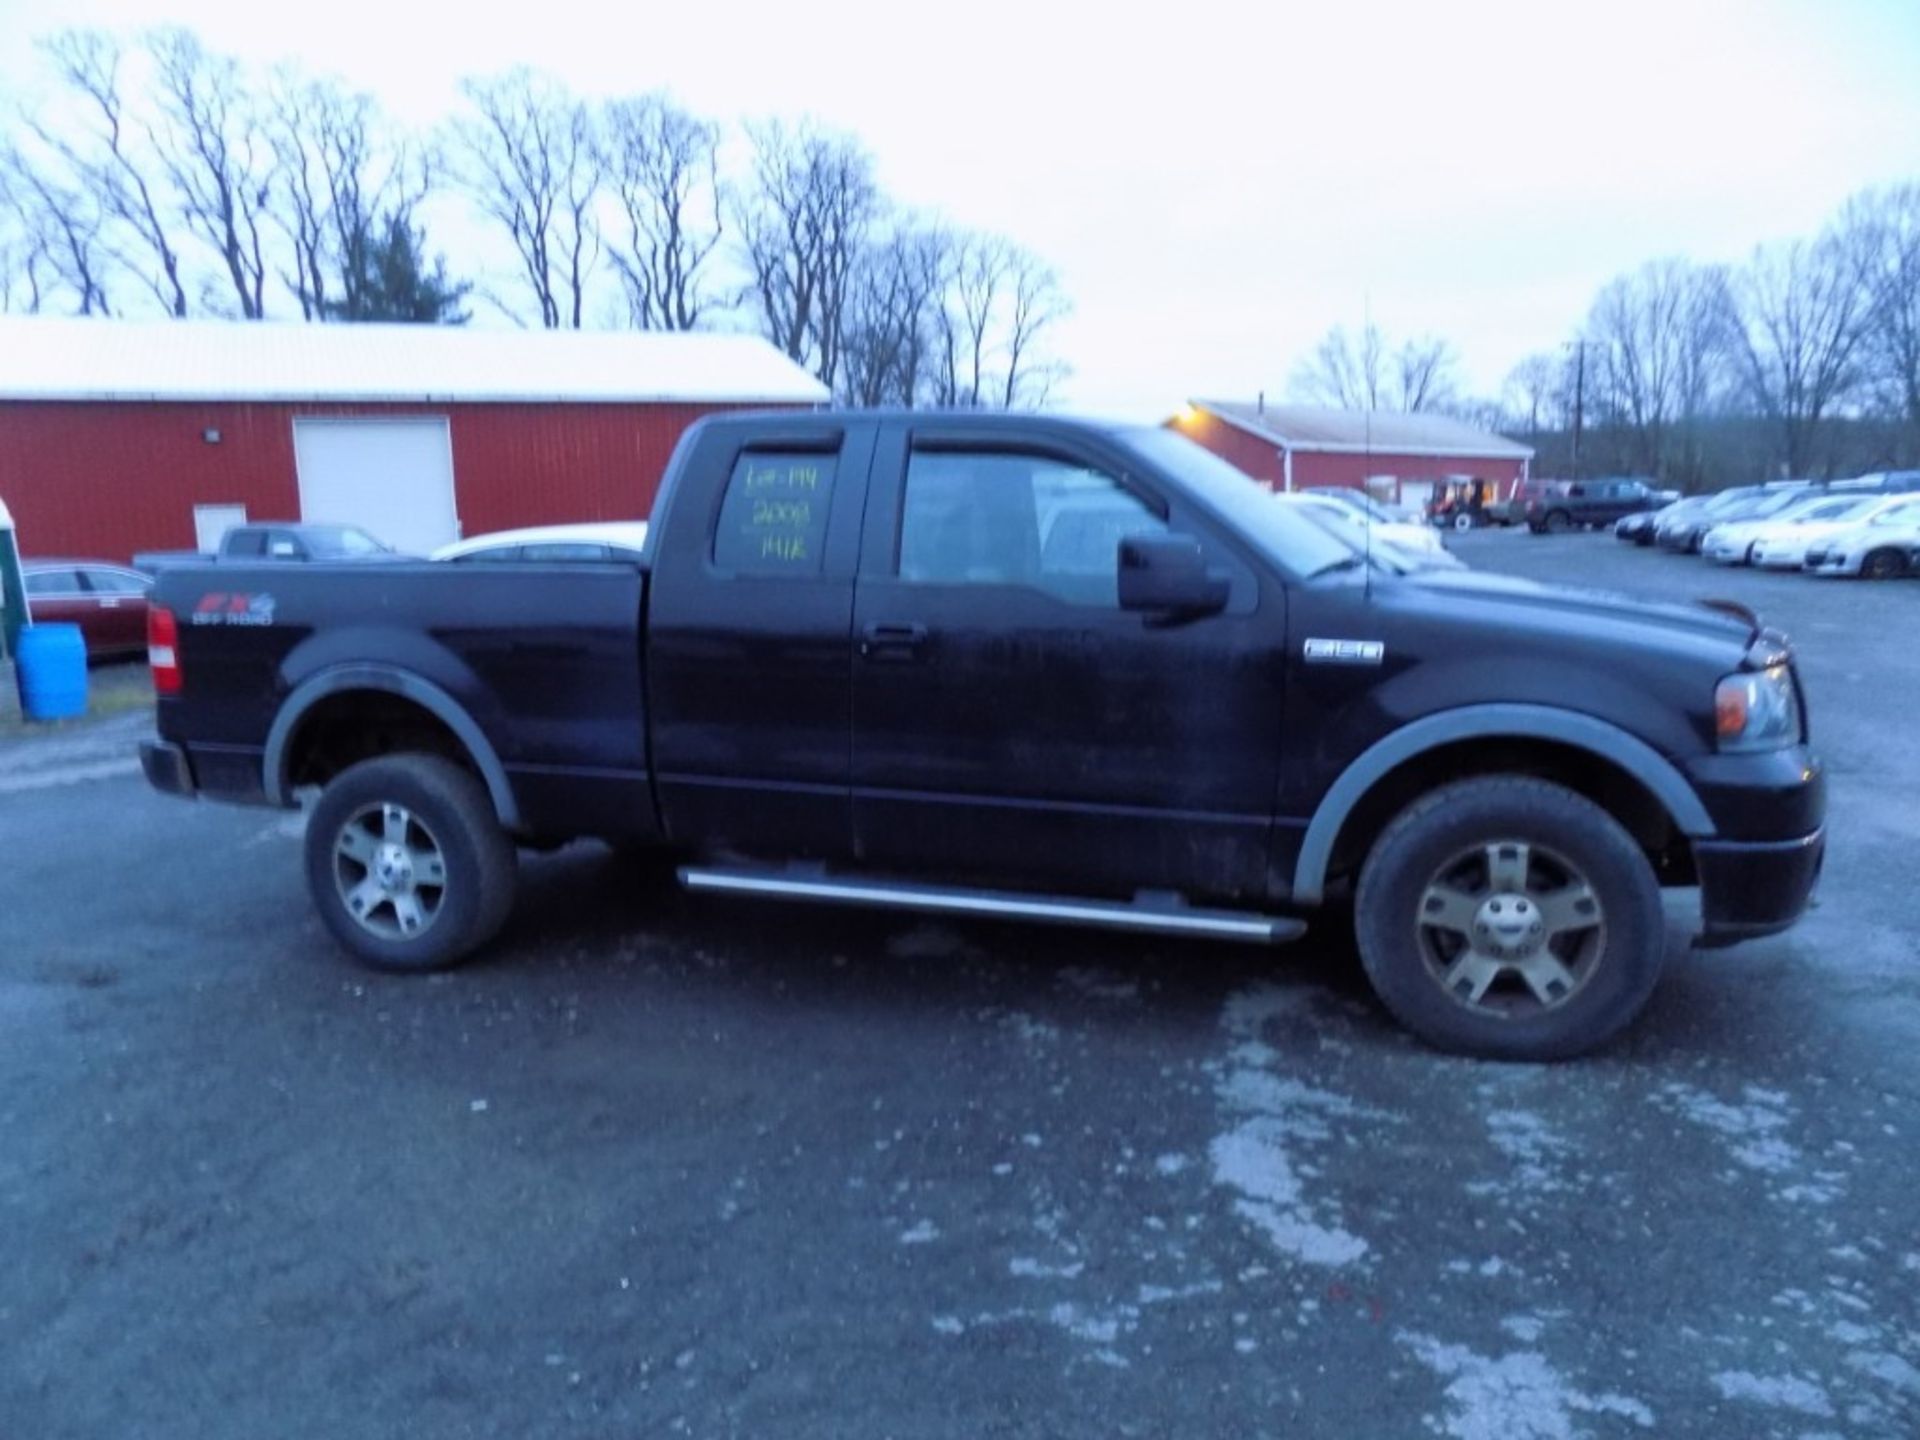 2008 Ford F150 Ext. Cab FX4, 4x4, Leather, Black, 141,861 Mi, Vin# 1FTPX14528FB94660 - OPEN TO ALL - Image 2 of 8